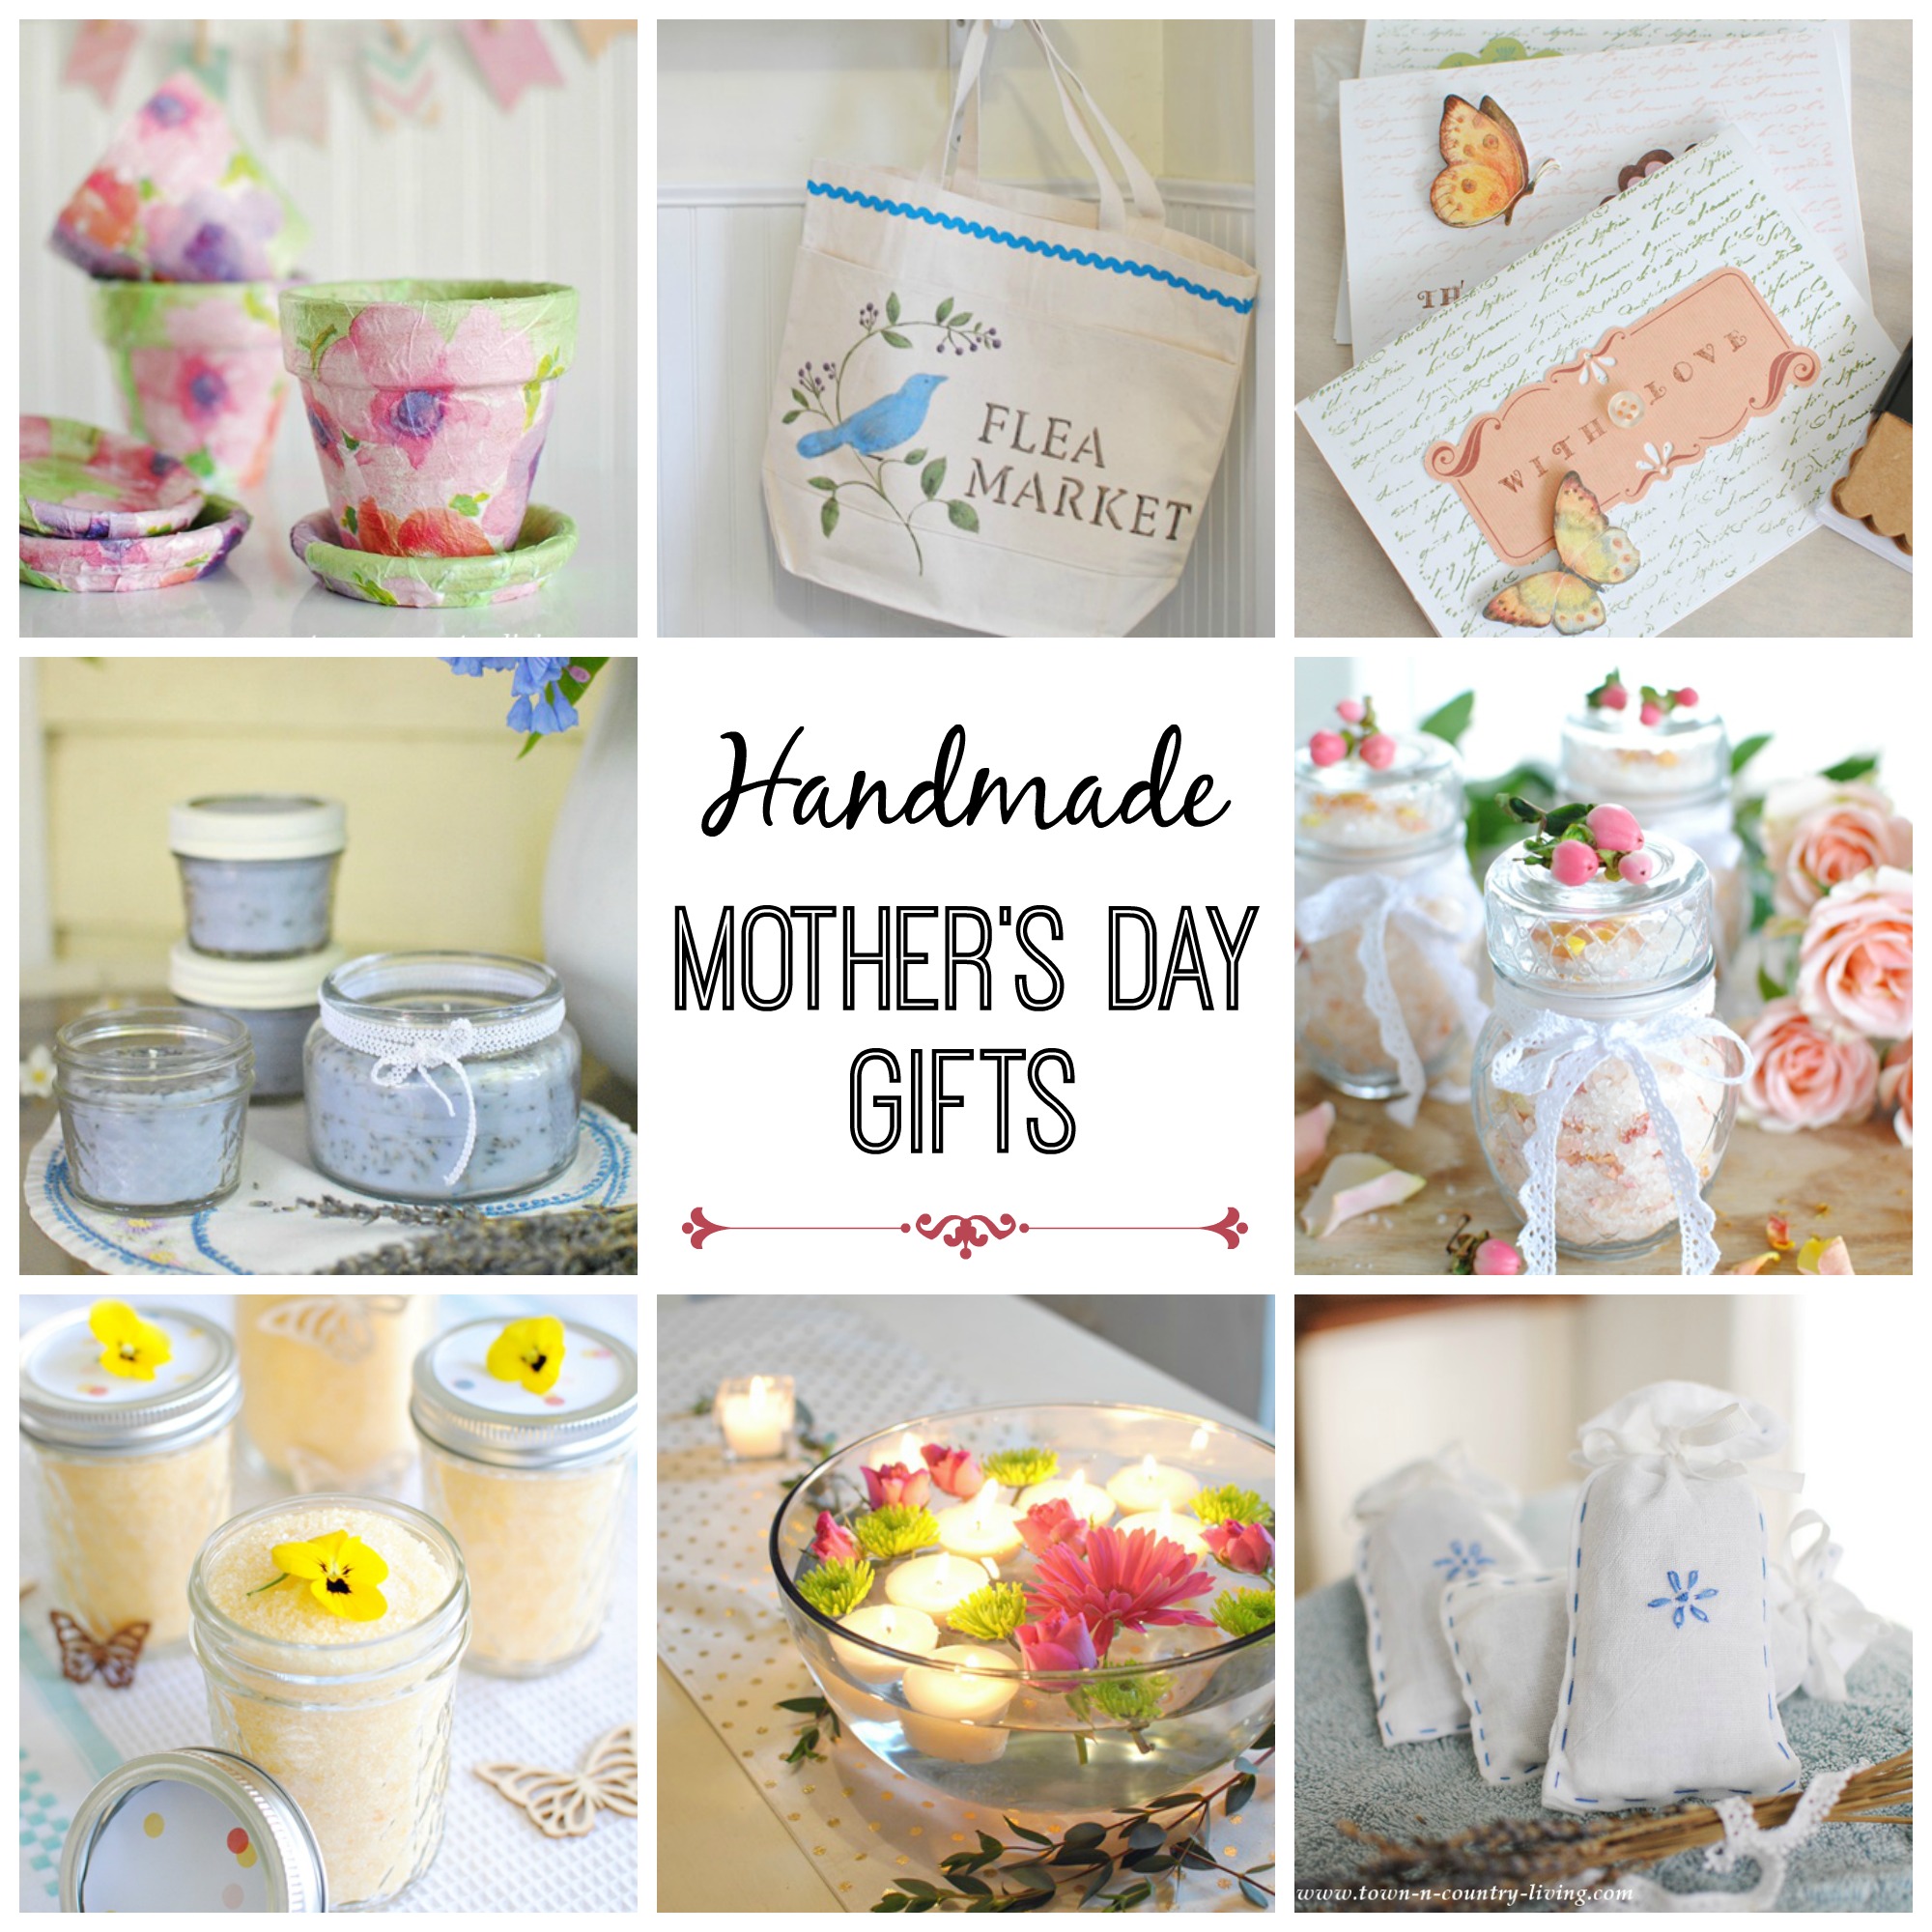 15 Handmade Gifts for Mother’s Day